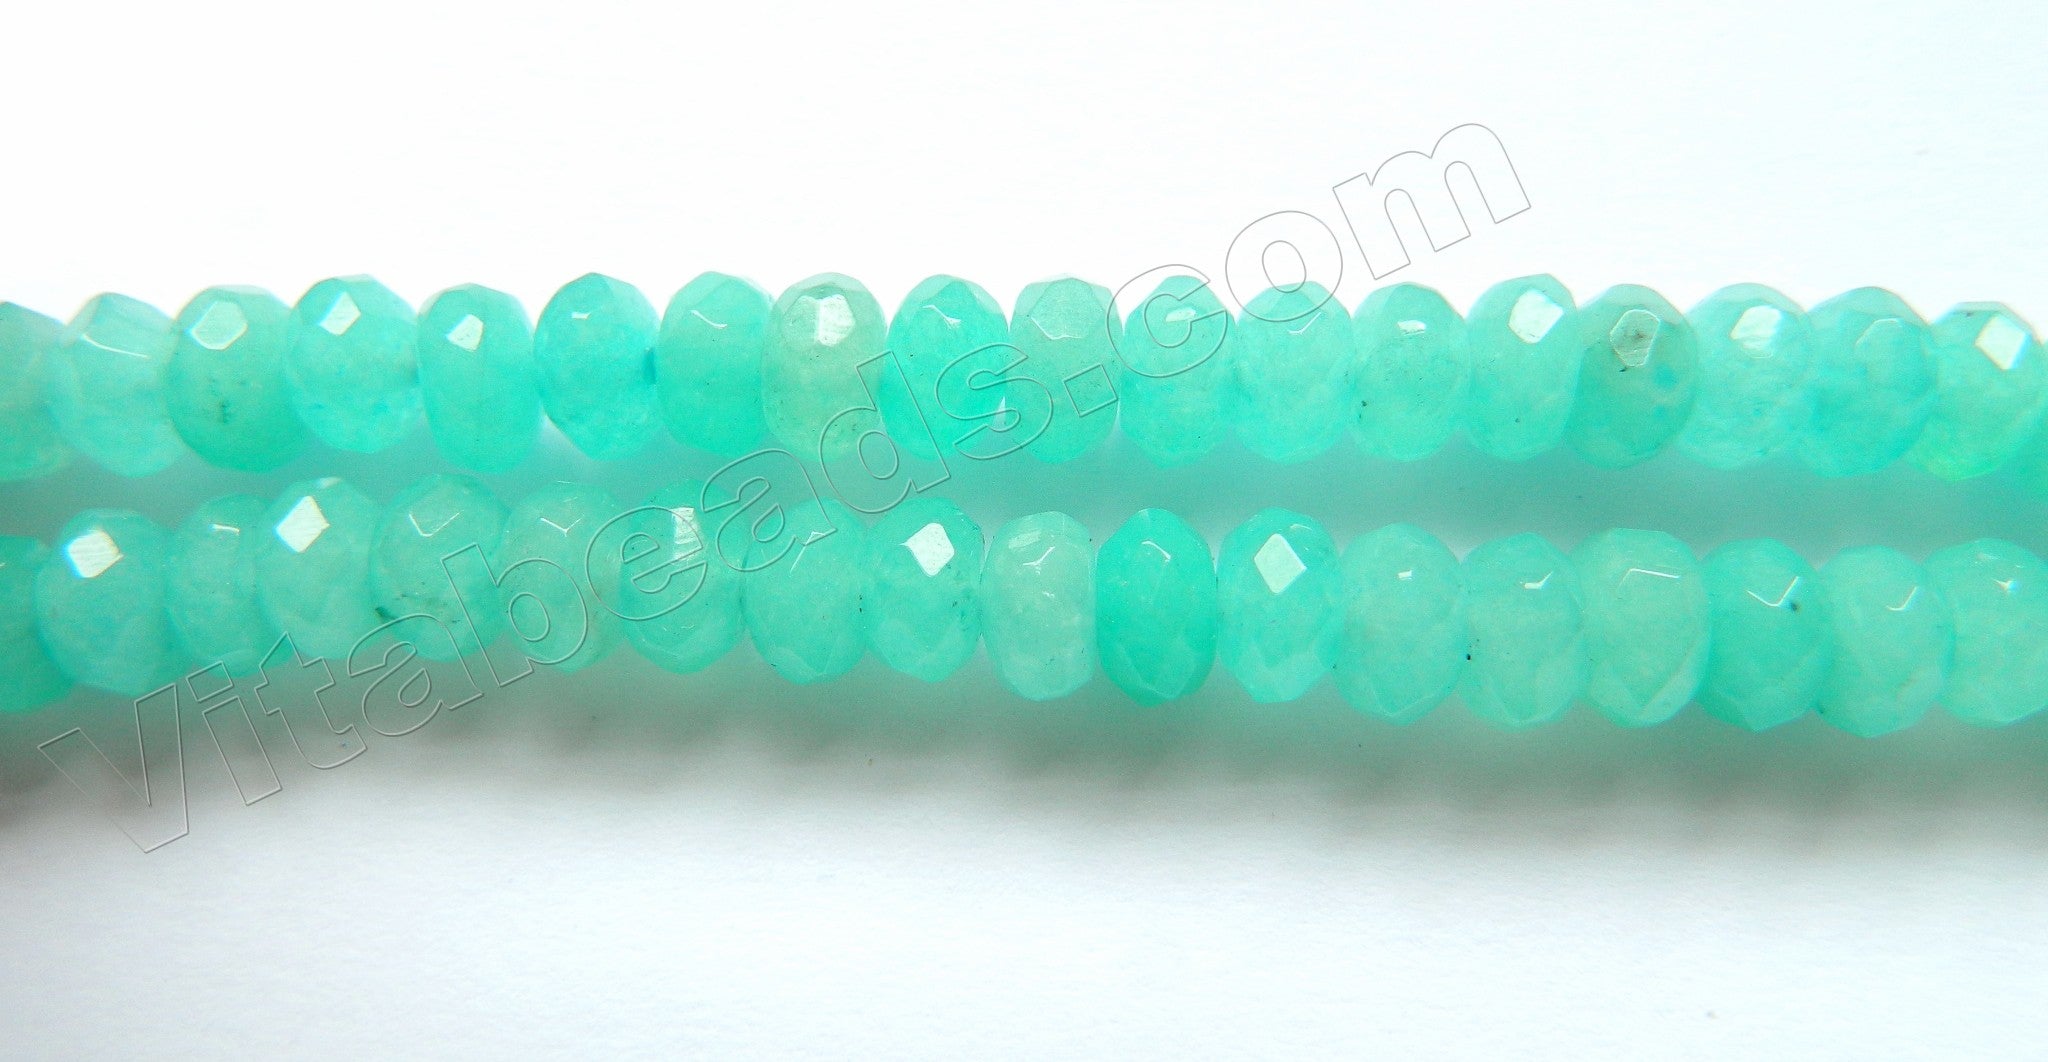 Light Russian Amazonite Jade AA -  Faceted Rondels  16"    5 x 8 mm